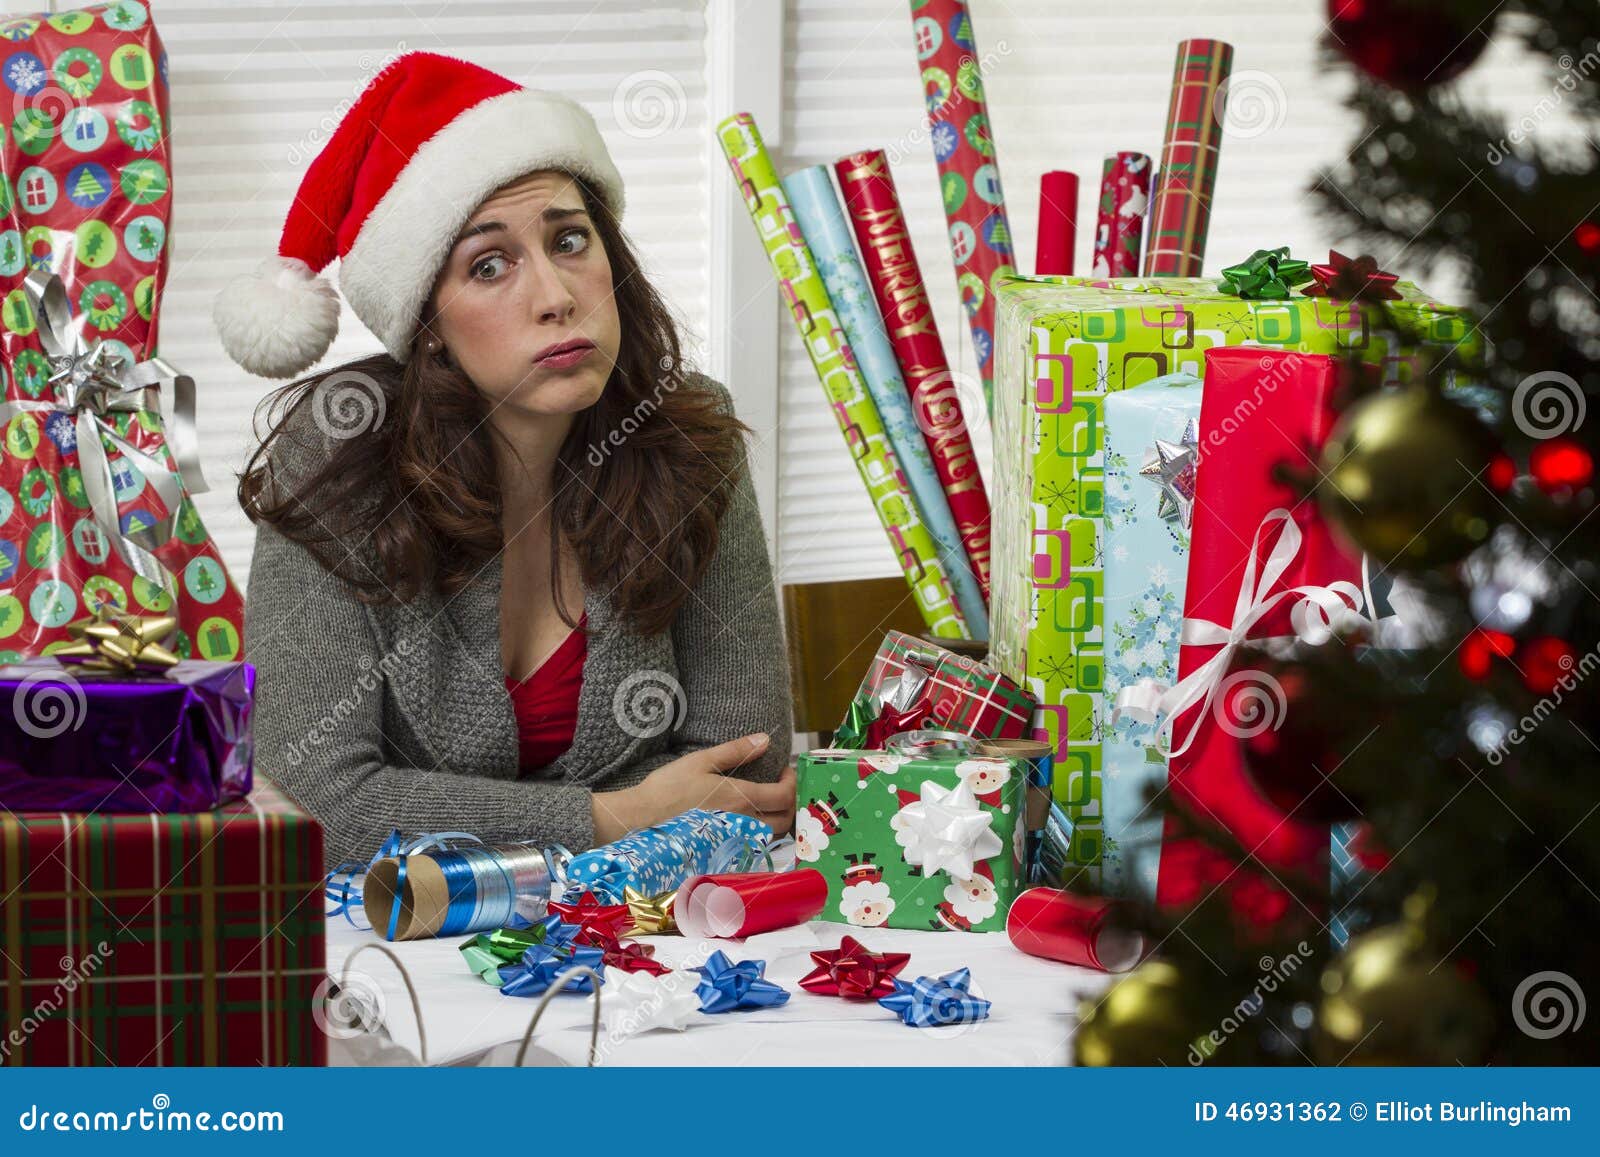 woman wrapping christmas presents, looking exhausted.